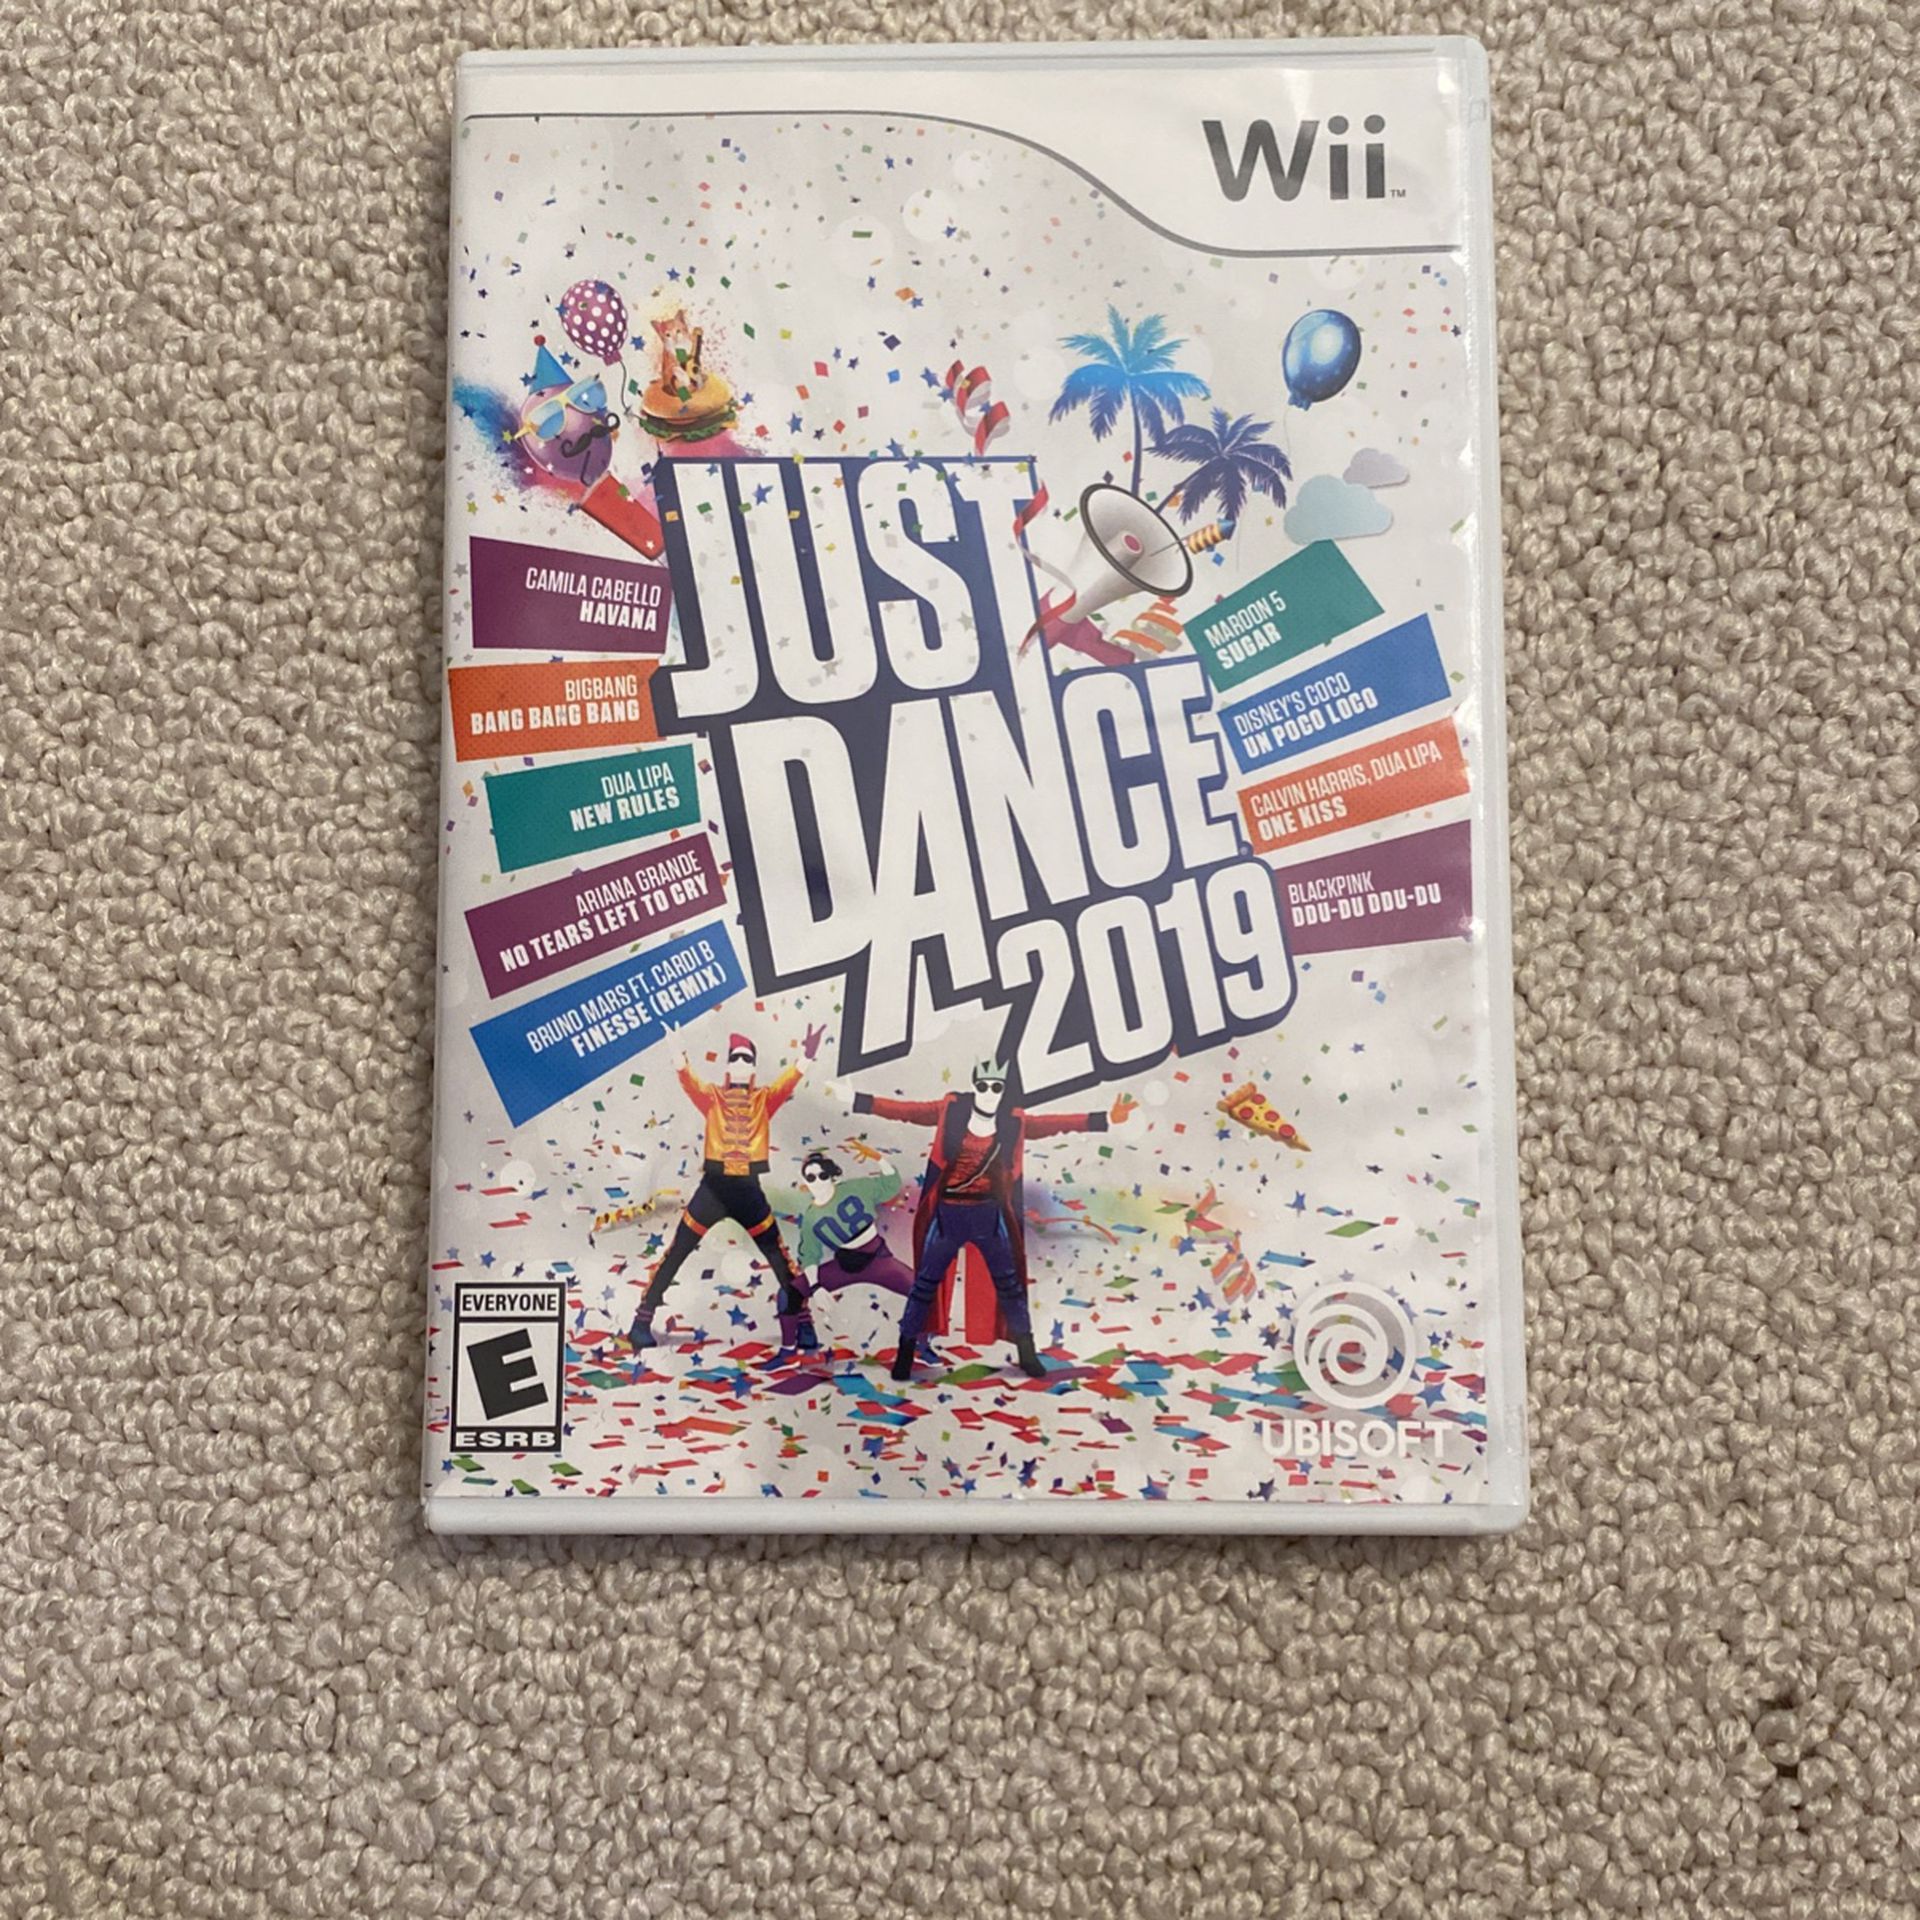 Just dance 2019 On The Wii